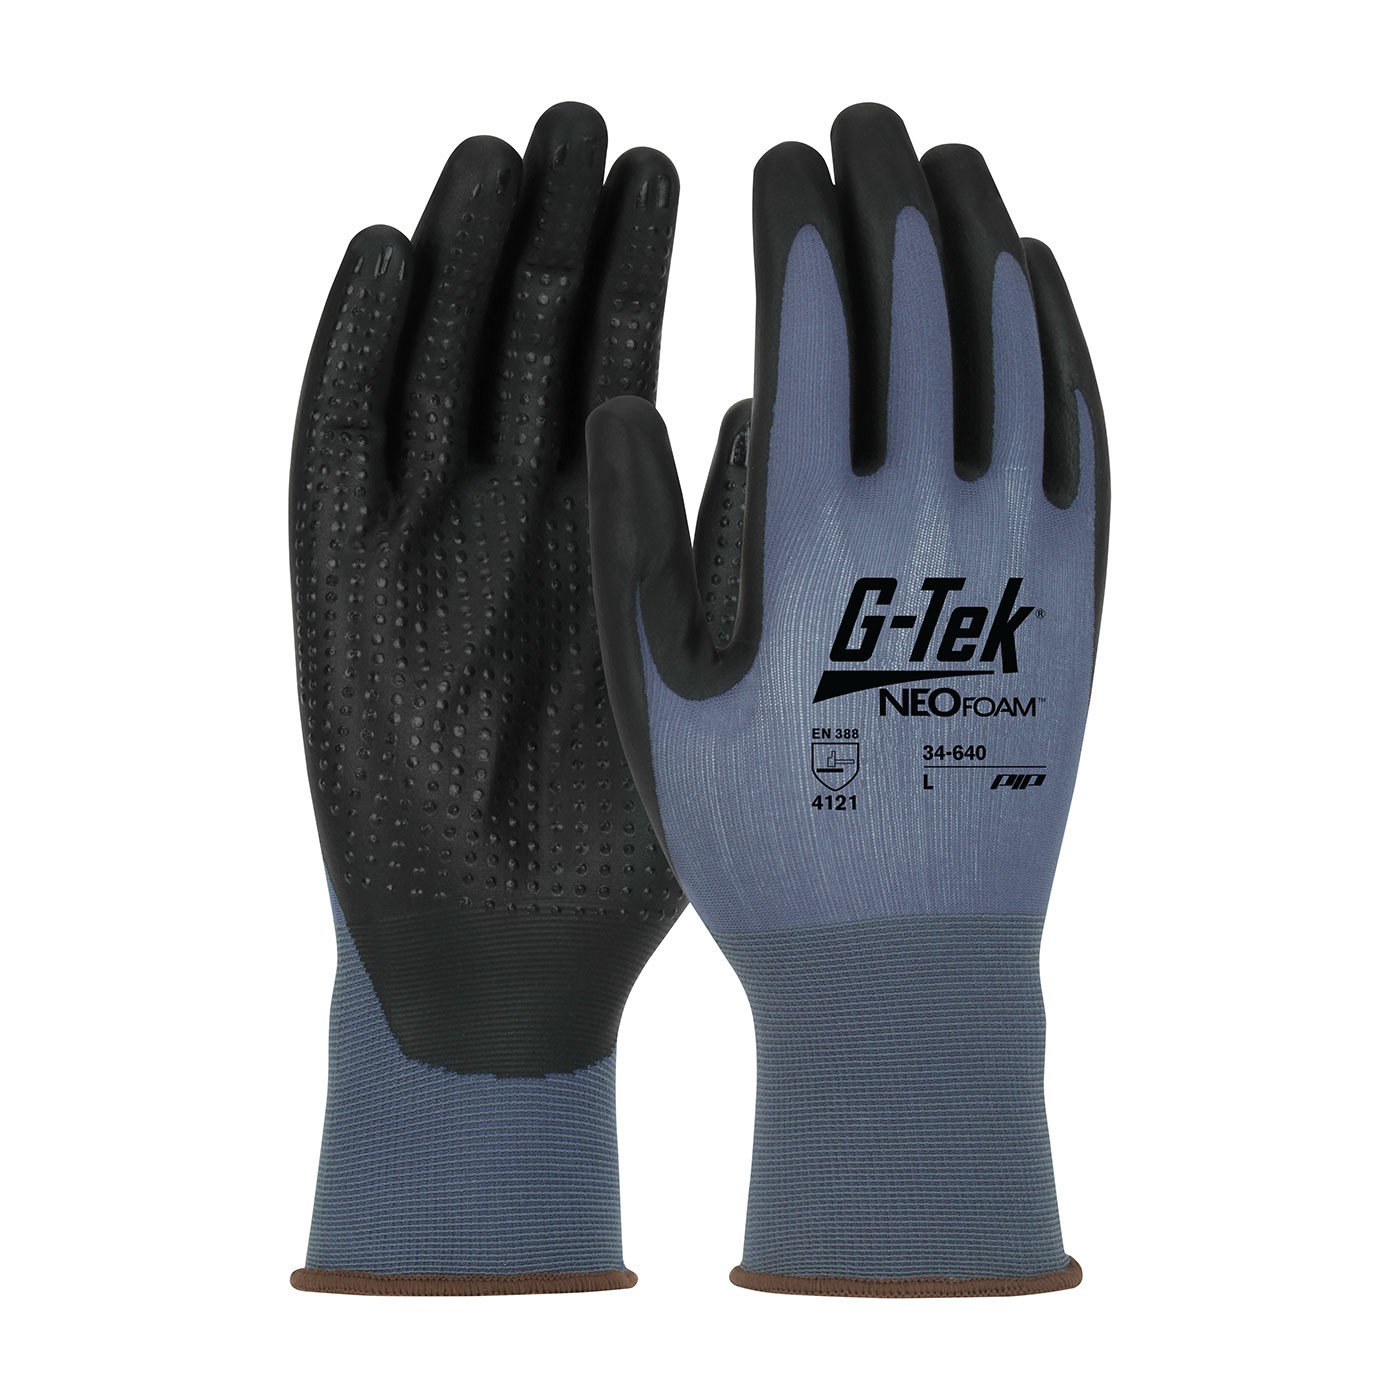 G-Tek® NeoFoam® Seamless Nylon Glove with NeoFoam® Coated Palm & Fingers and Micro Dot Palm - Touchscreen Compatible (#34-640)